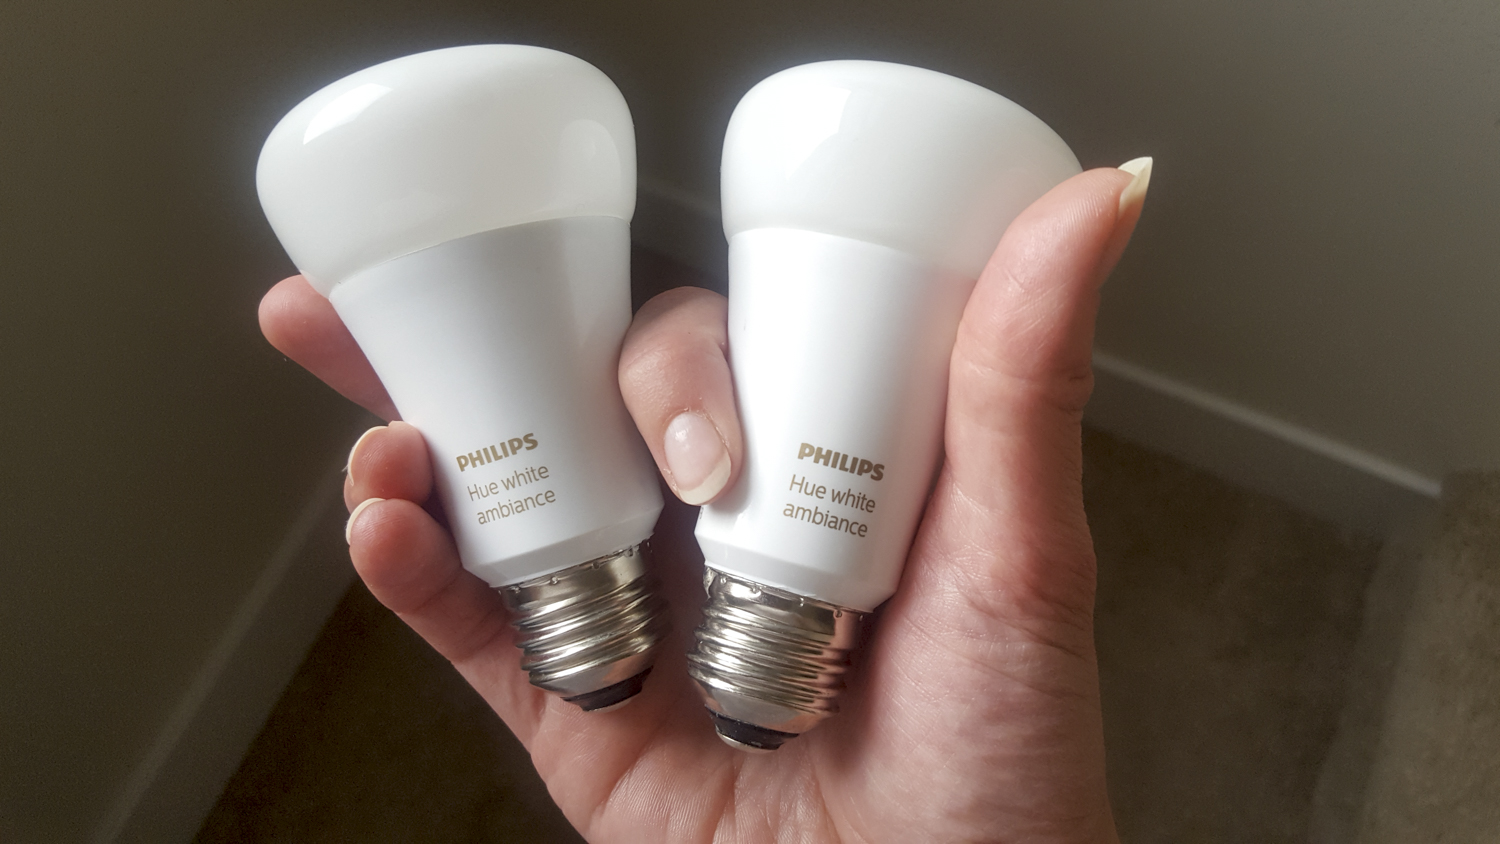 https://www.digitaltrends.com/wp-content/uploads/2018/06/philips-hue-white-ambiance-starter-kit-review-2666.jpg?fit=1500%2C844&p=1